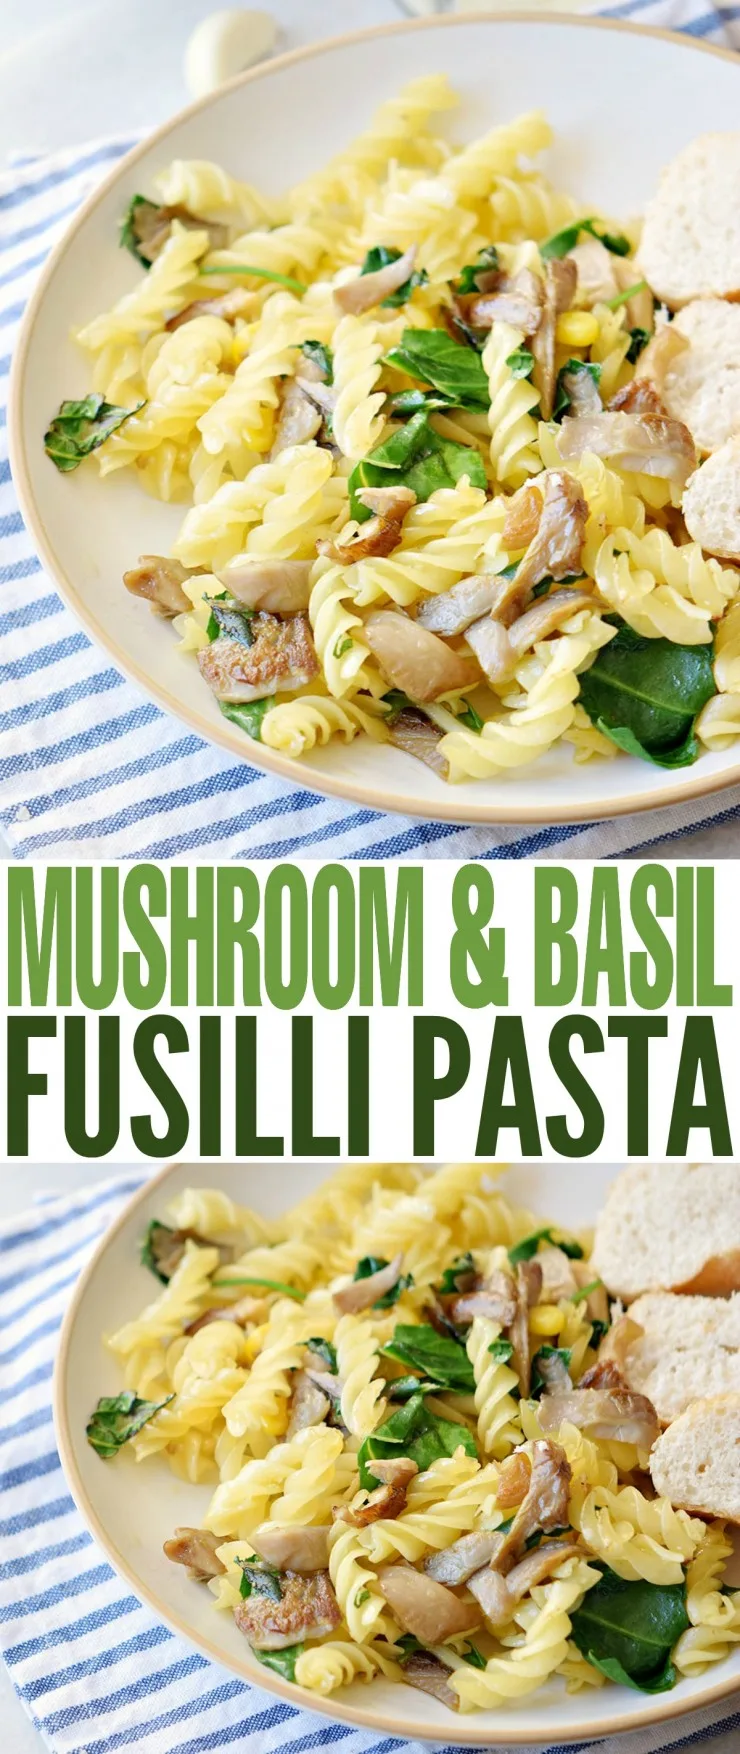 This Mushroom & Basil Fusilli Pasta is a fast and easy pasta dinner featuring fresh mushrooms and basil.